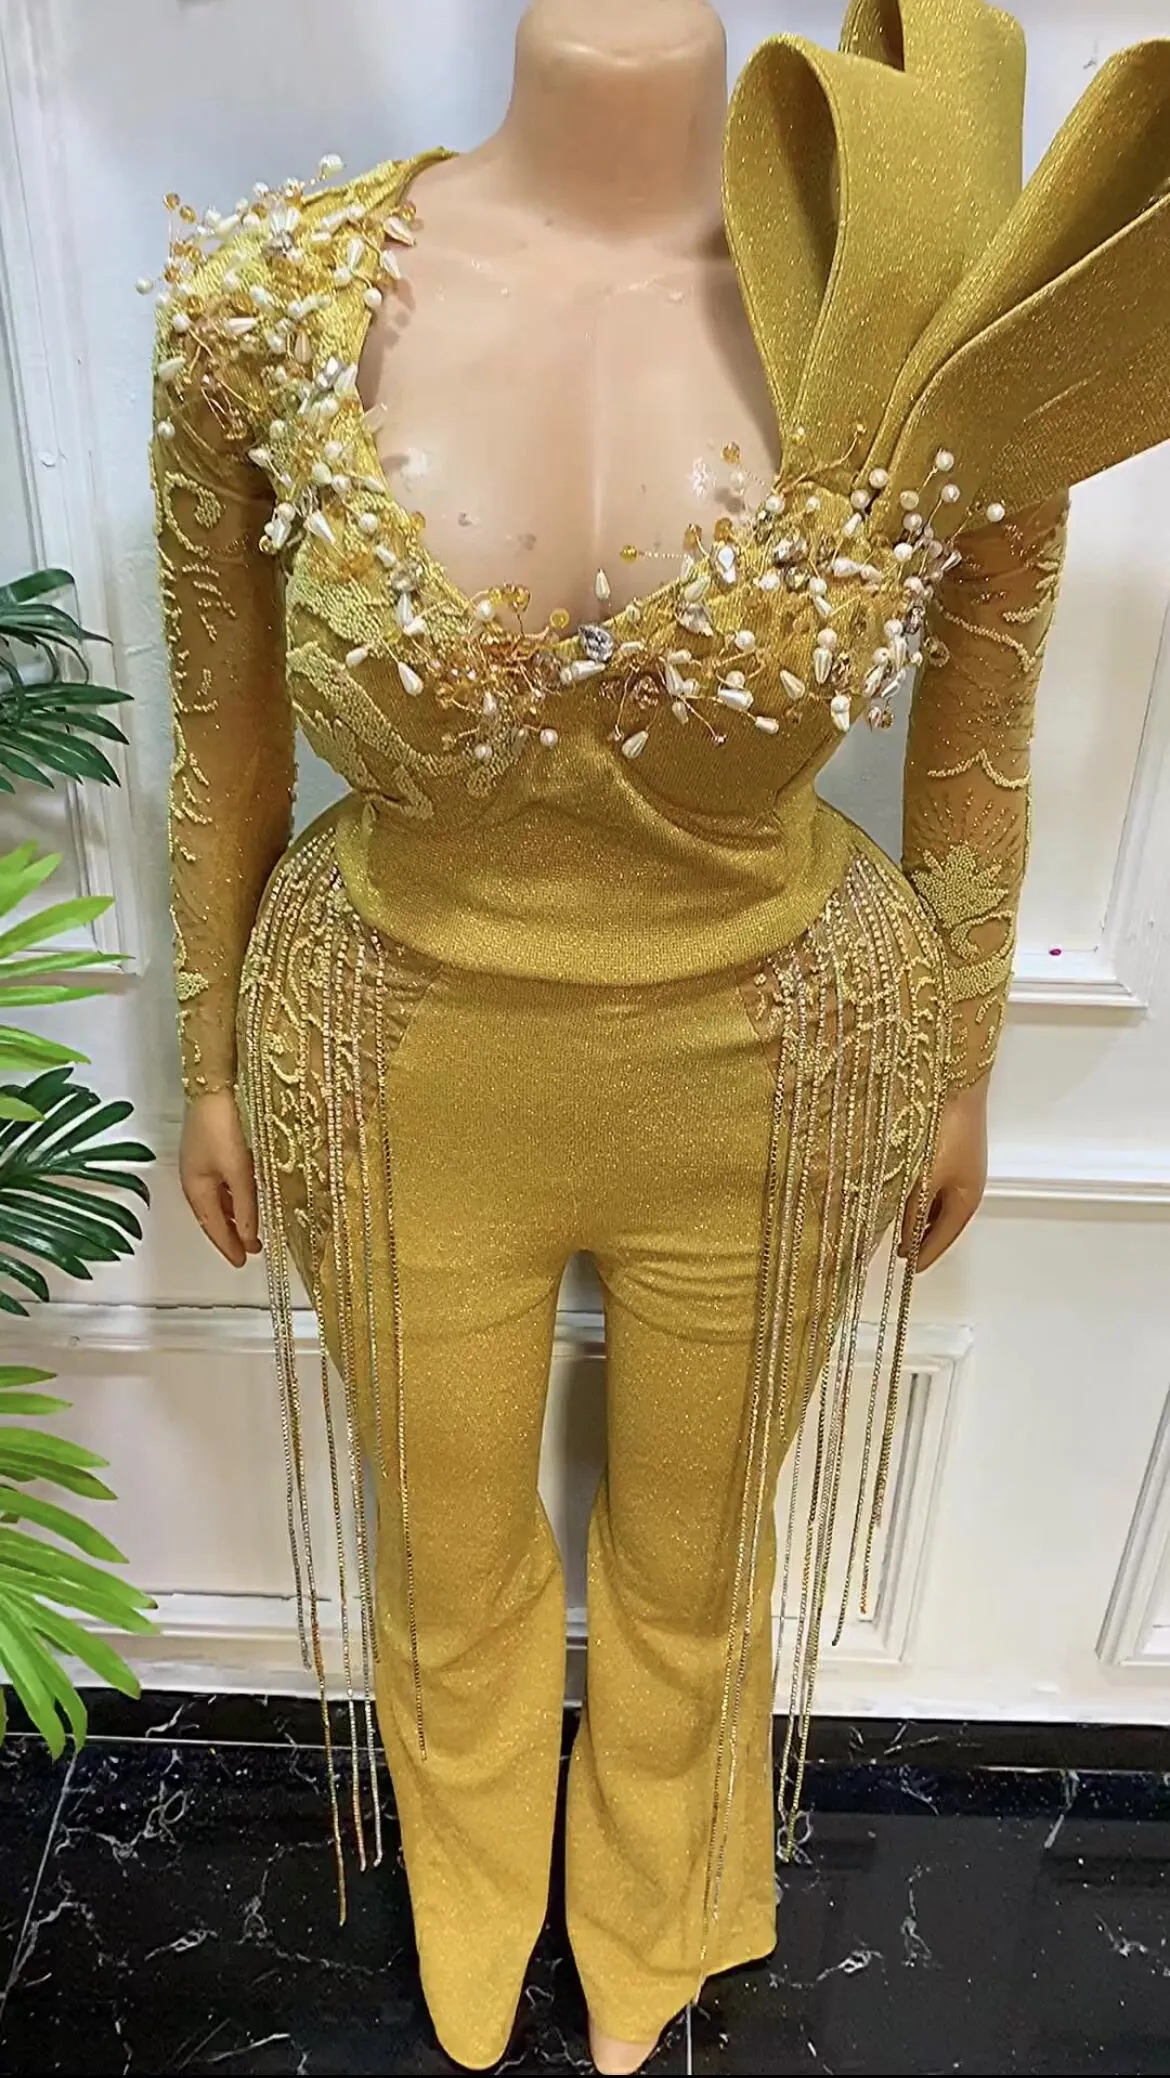 2023 August Aso Gold Sheath Jumpsuits Prom Dress Beaded Crystals Evening Formal Party Second Reception Birthday Engagement Gowns Dresses Robe De Soiree ZJ787